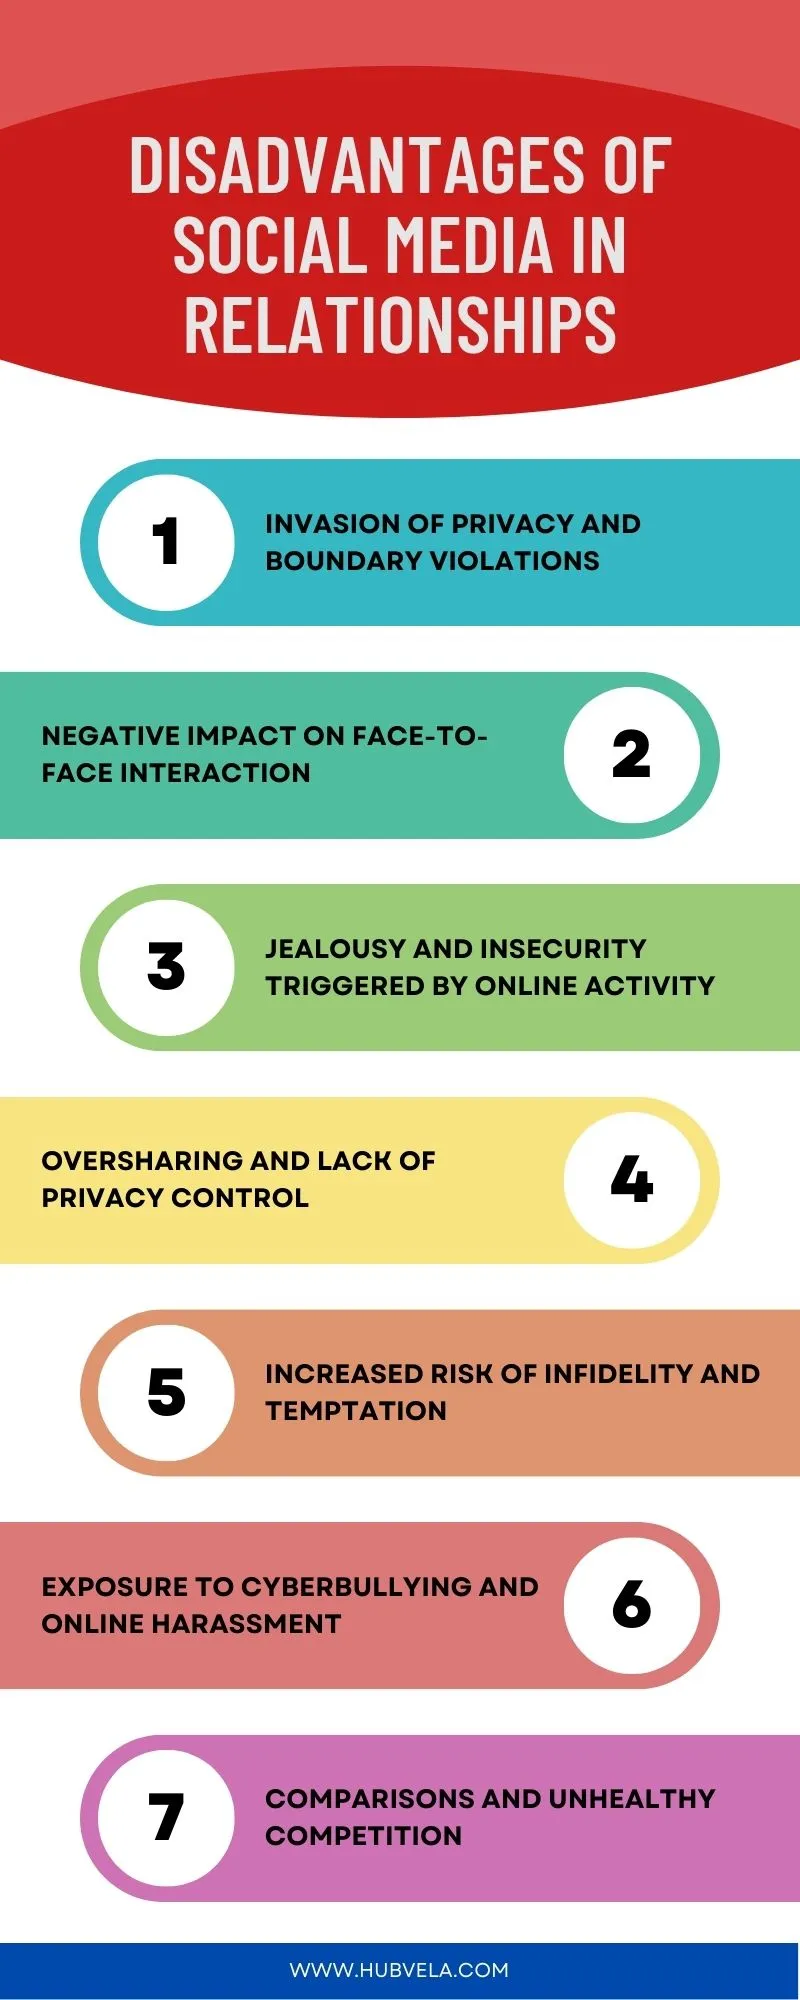 Disadvantages of Social Media in Relationships infographic